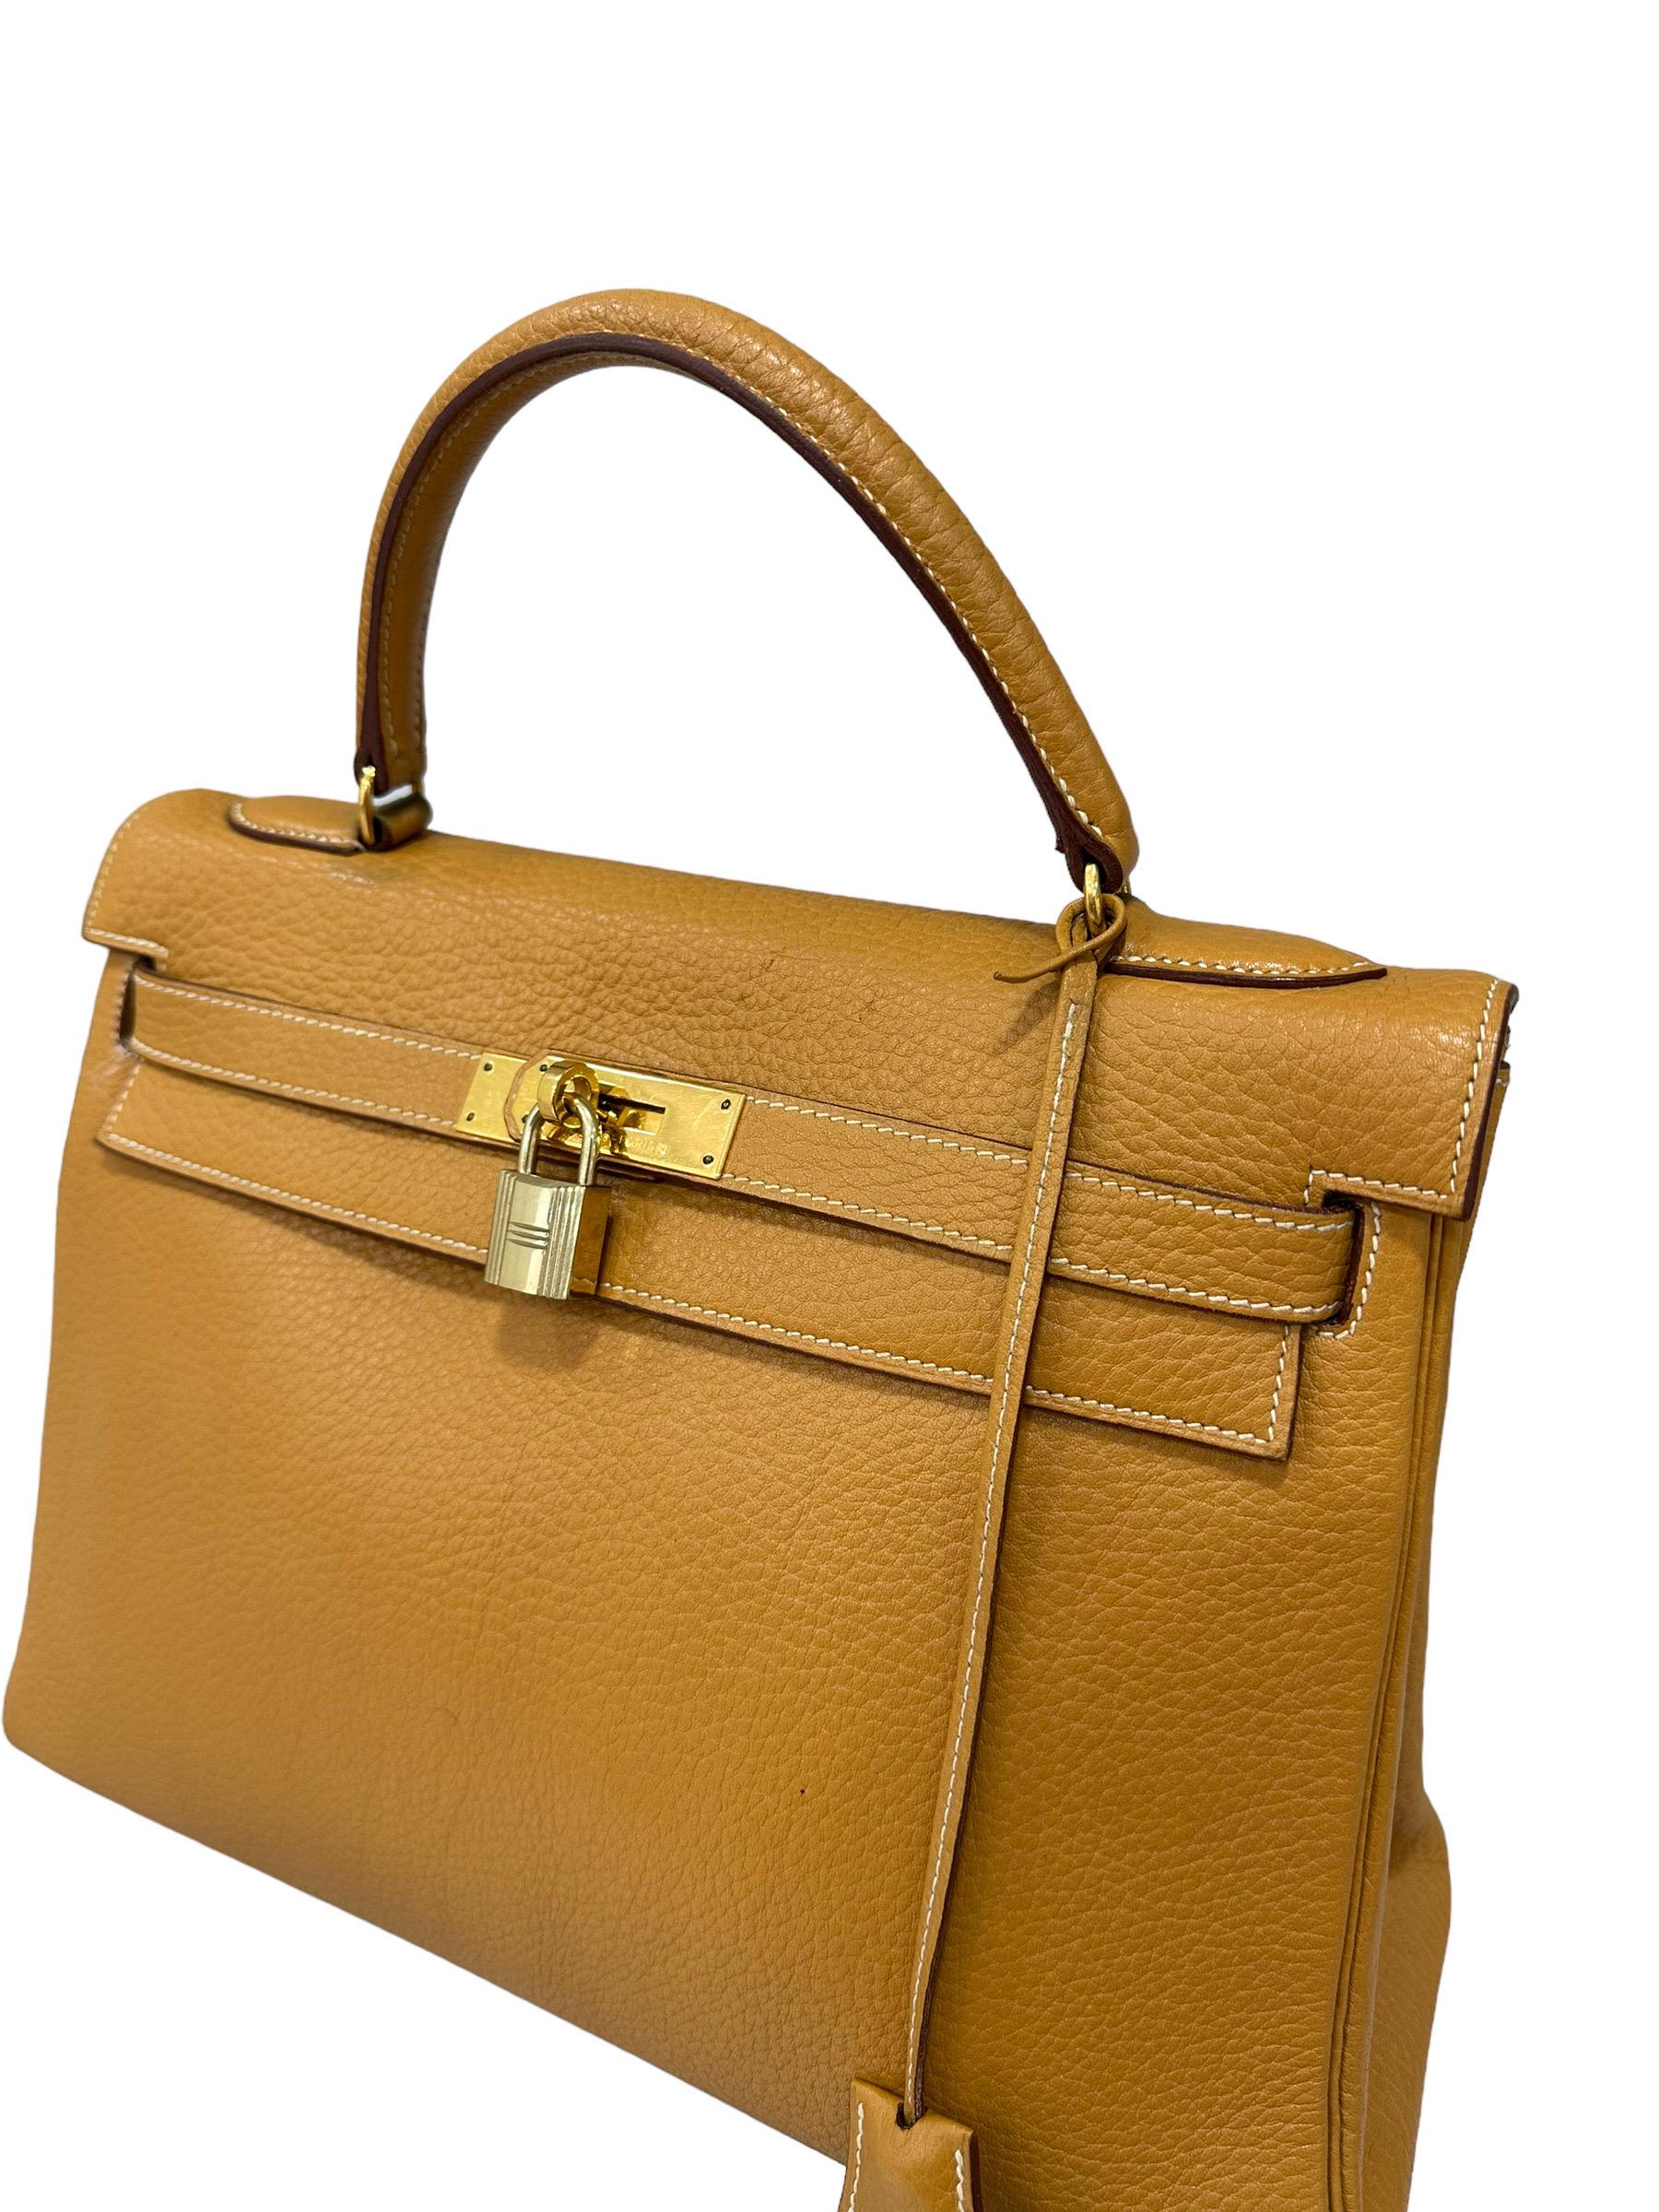 Bag by Hermès, Kelly model, size 32, made in Fjord leather, soft to the touch and with visible grain. Equipped with a flap with interlocking closure, with horizontal padlock band and clochette with keys. Internally lined in smooth leather of the